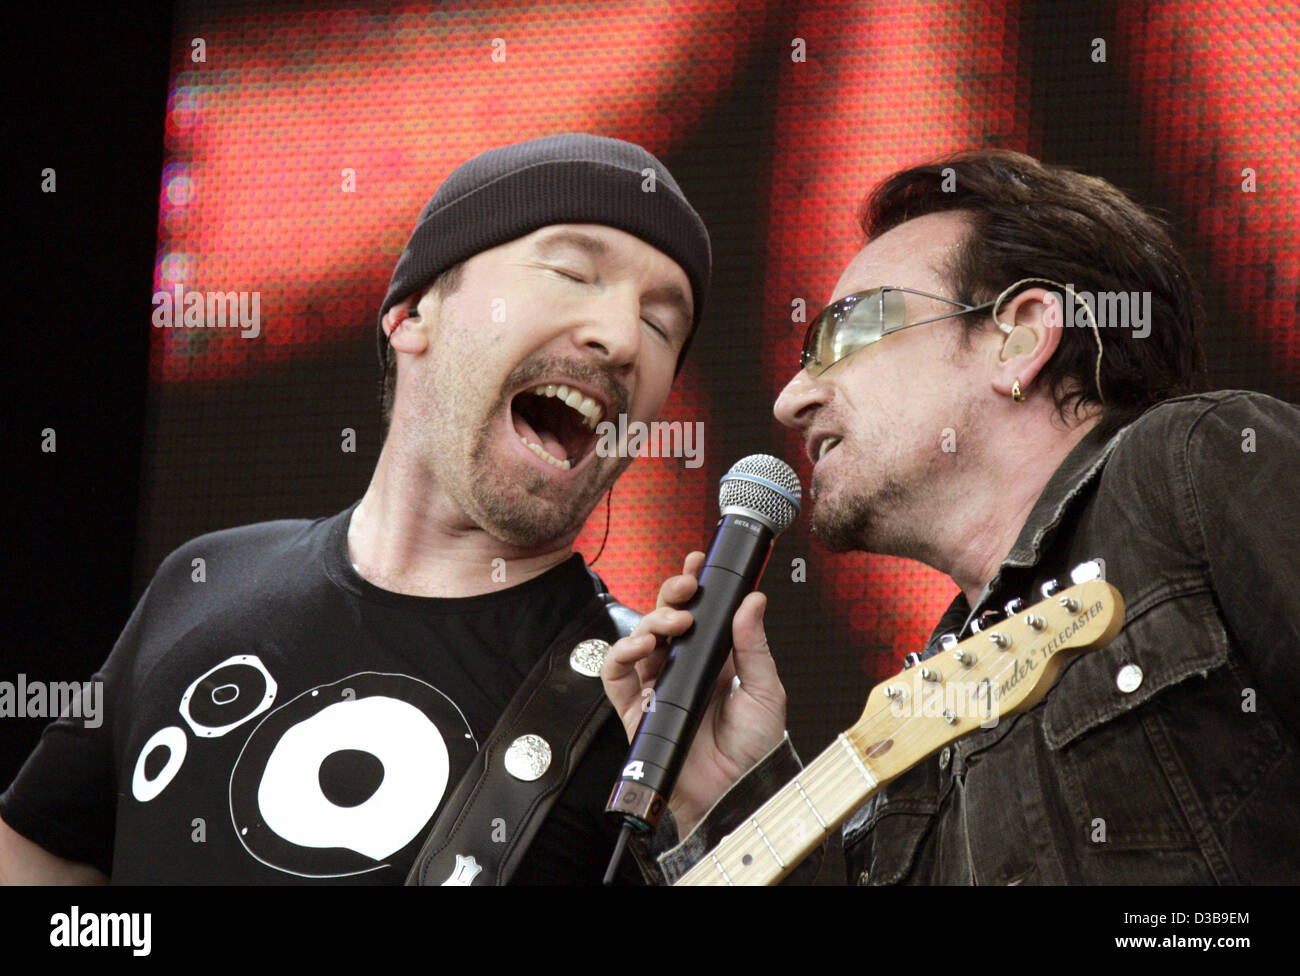 (dpa) - Bono (R) and guitarist The Edge of the rock band U2 perform during the Live 8 Concert in Hyde Park in London, England, 2 July 2005. The concert, held simultaneously in many cities around the world including Paris, Berlin, Philadelphia and Rome, aims to call attention to world poverty in the  Stock Photo